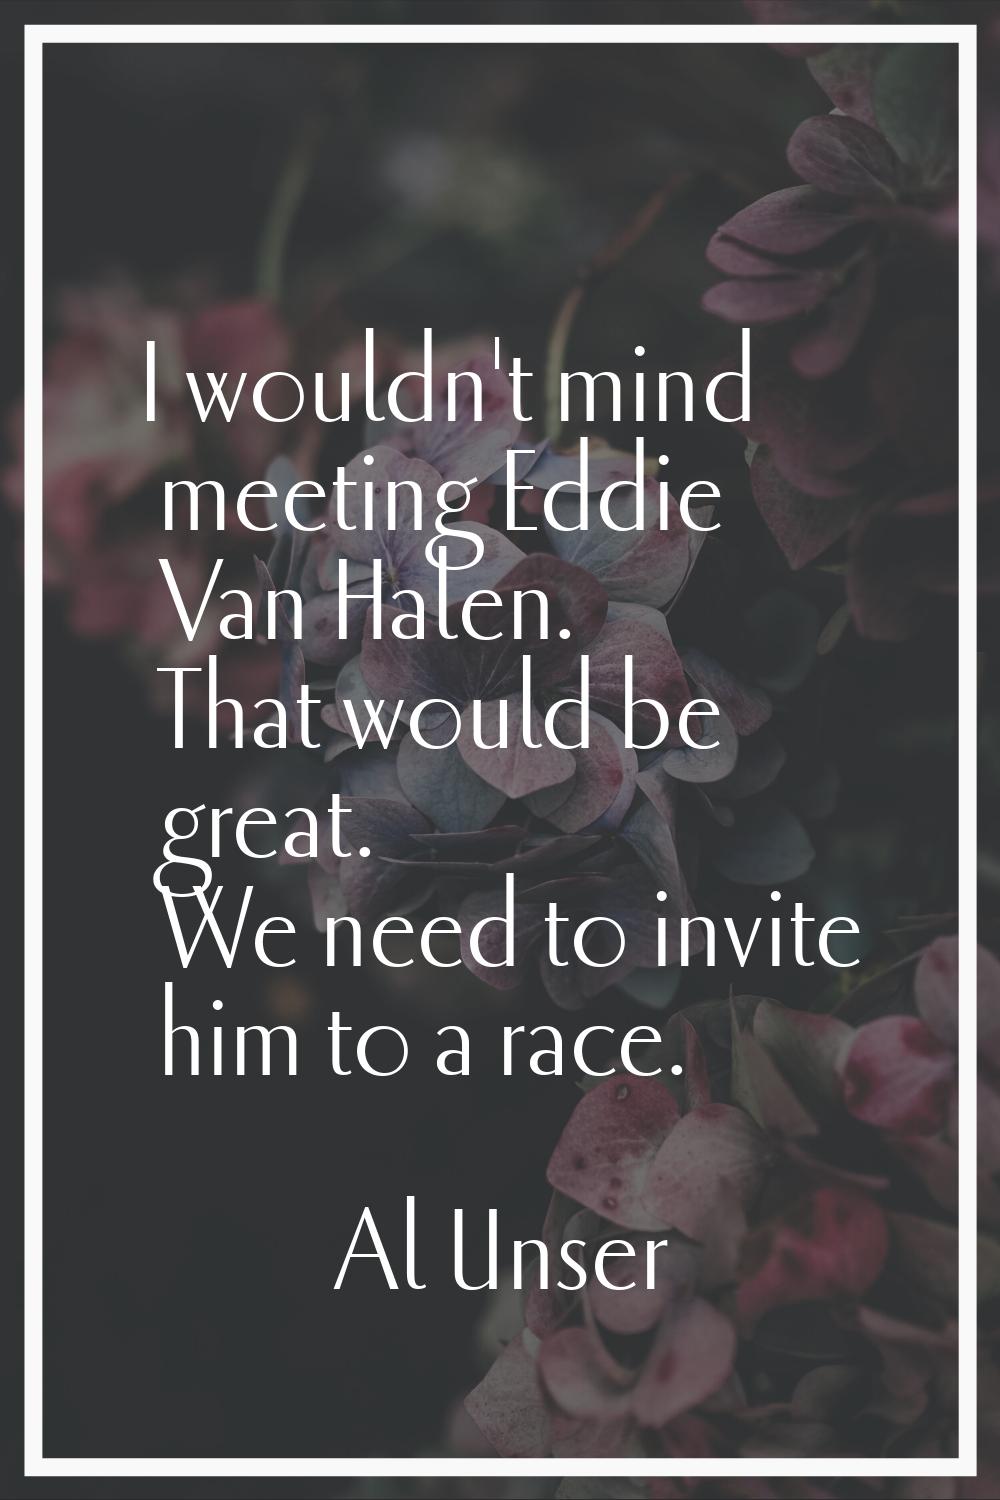 I wouldn't mind meeting Eddie Van Halen. That would be great. We need to invite him to a race.